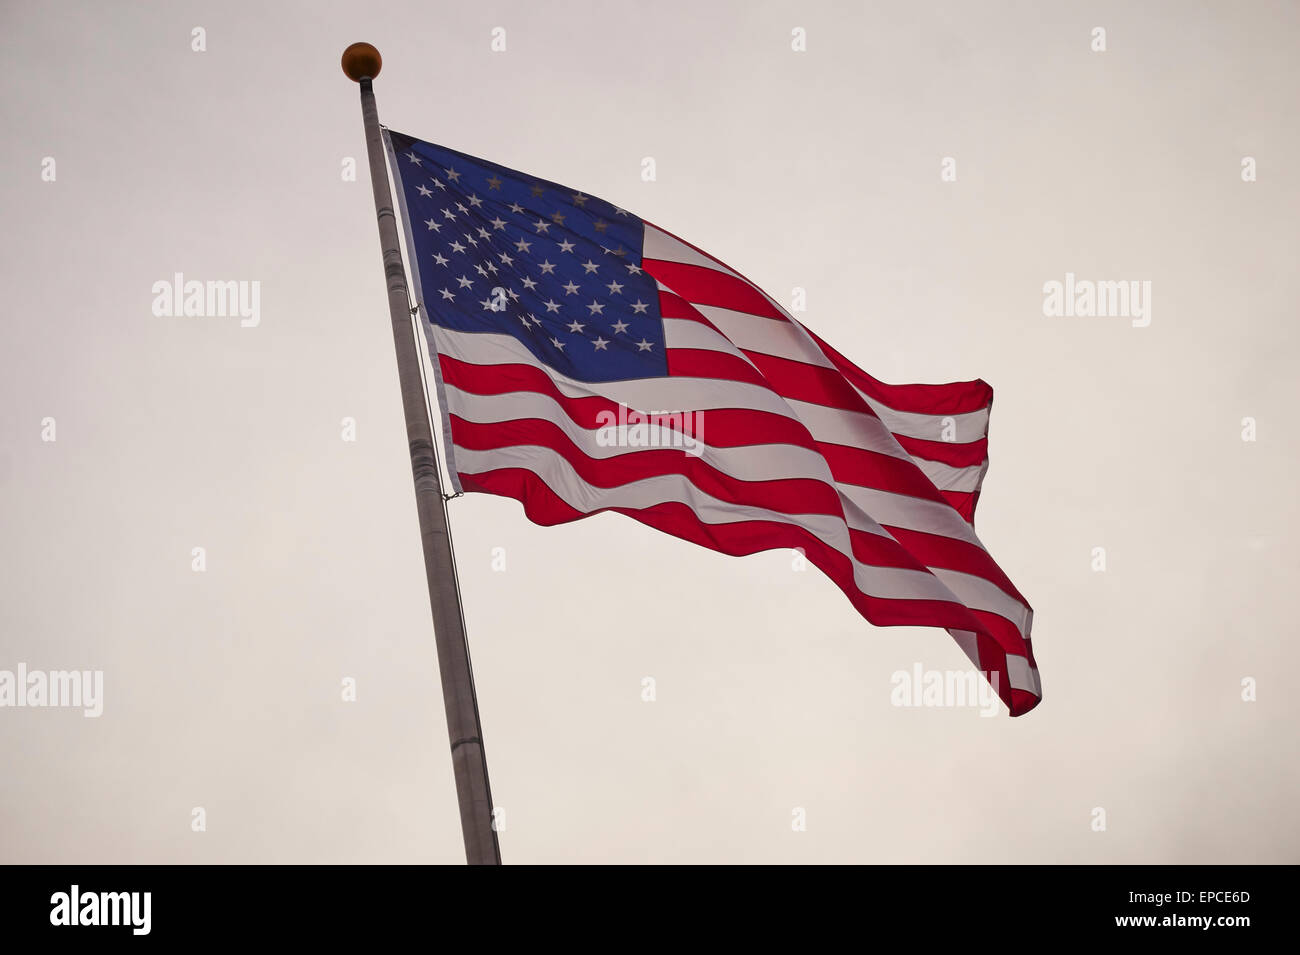 American flag flying, Liberty State Park, New Jersey, USA Banque D'Images